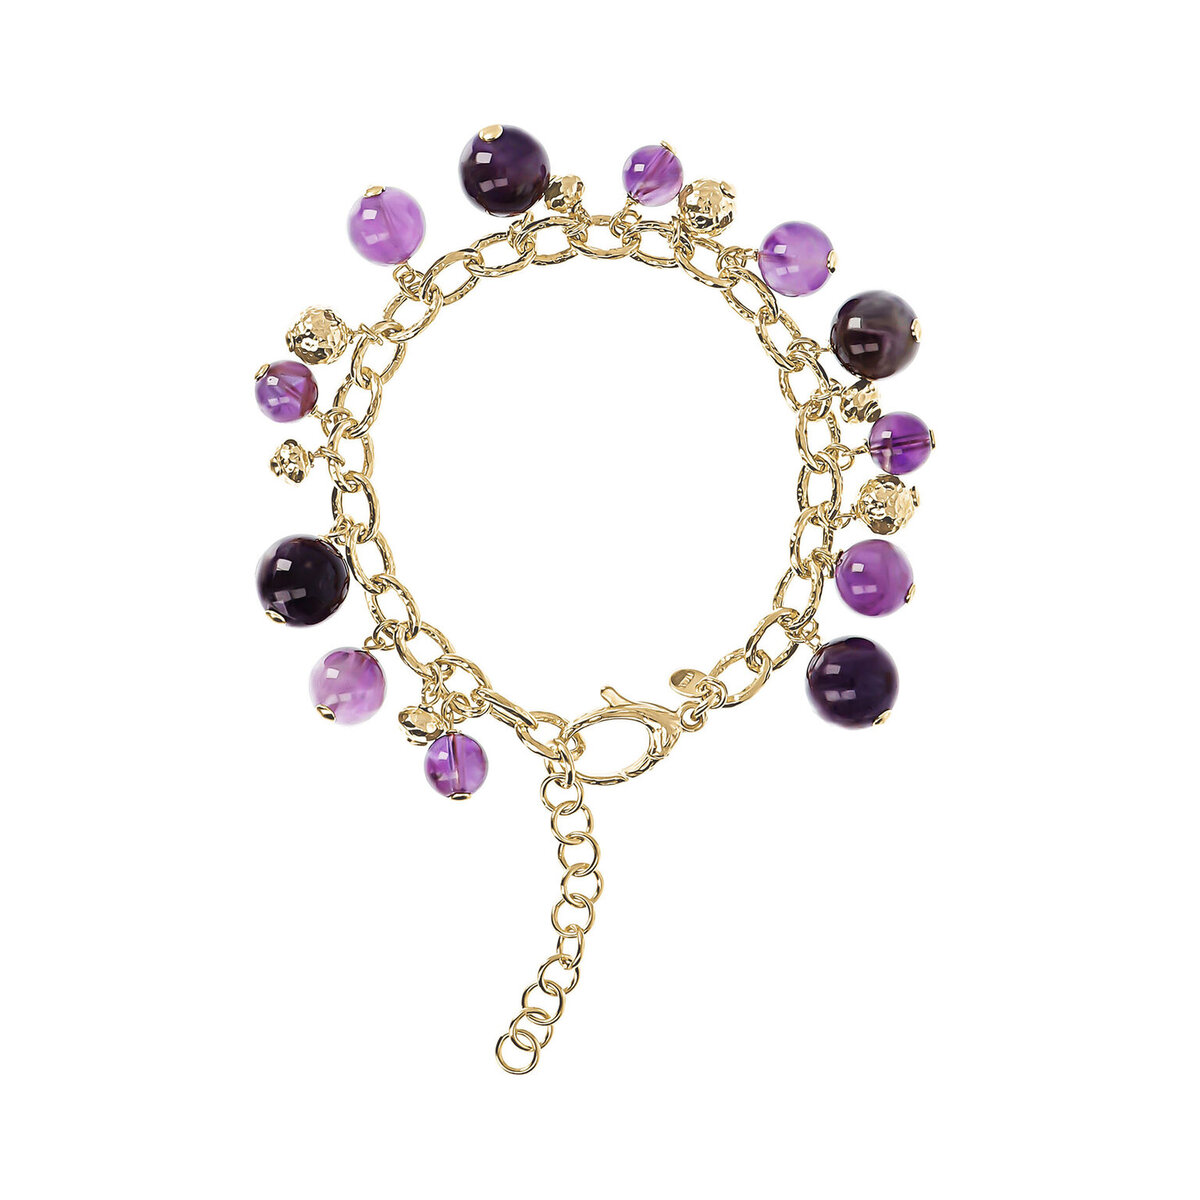 Rolo Chain Bracelet with Golden Spheres Charms and Natural Stones